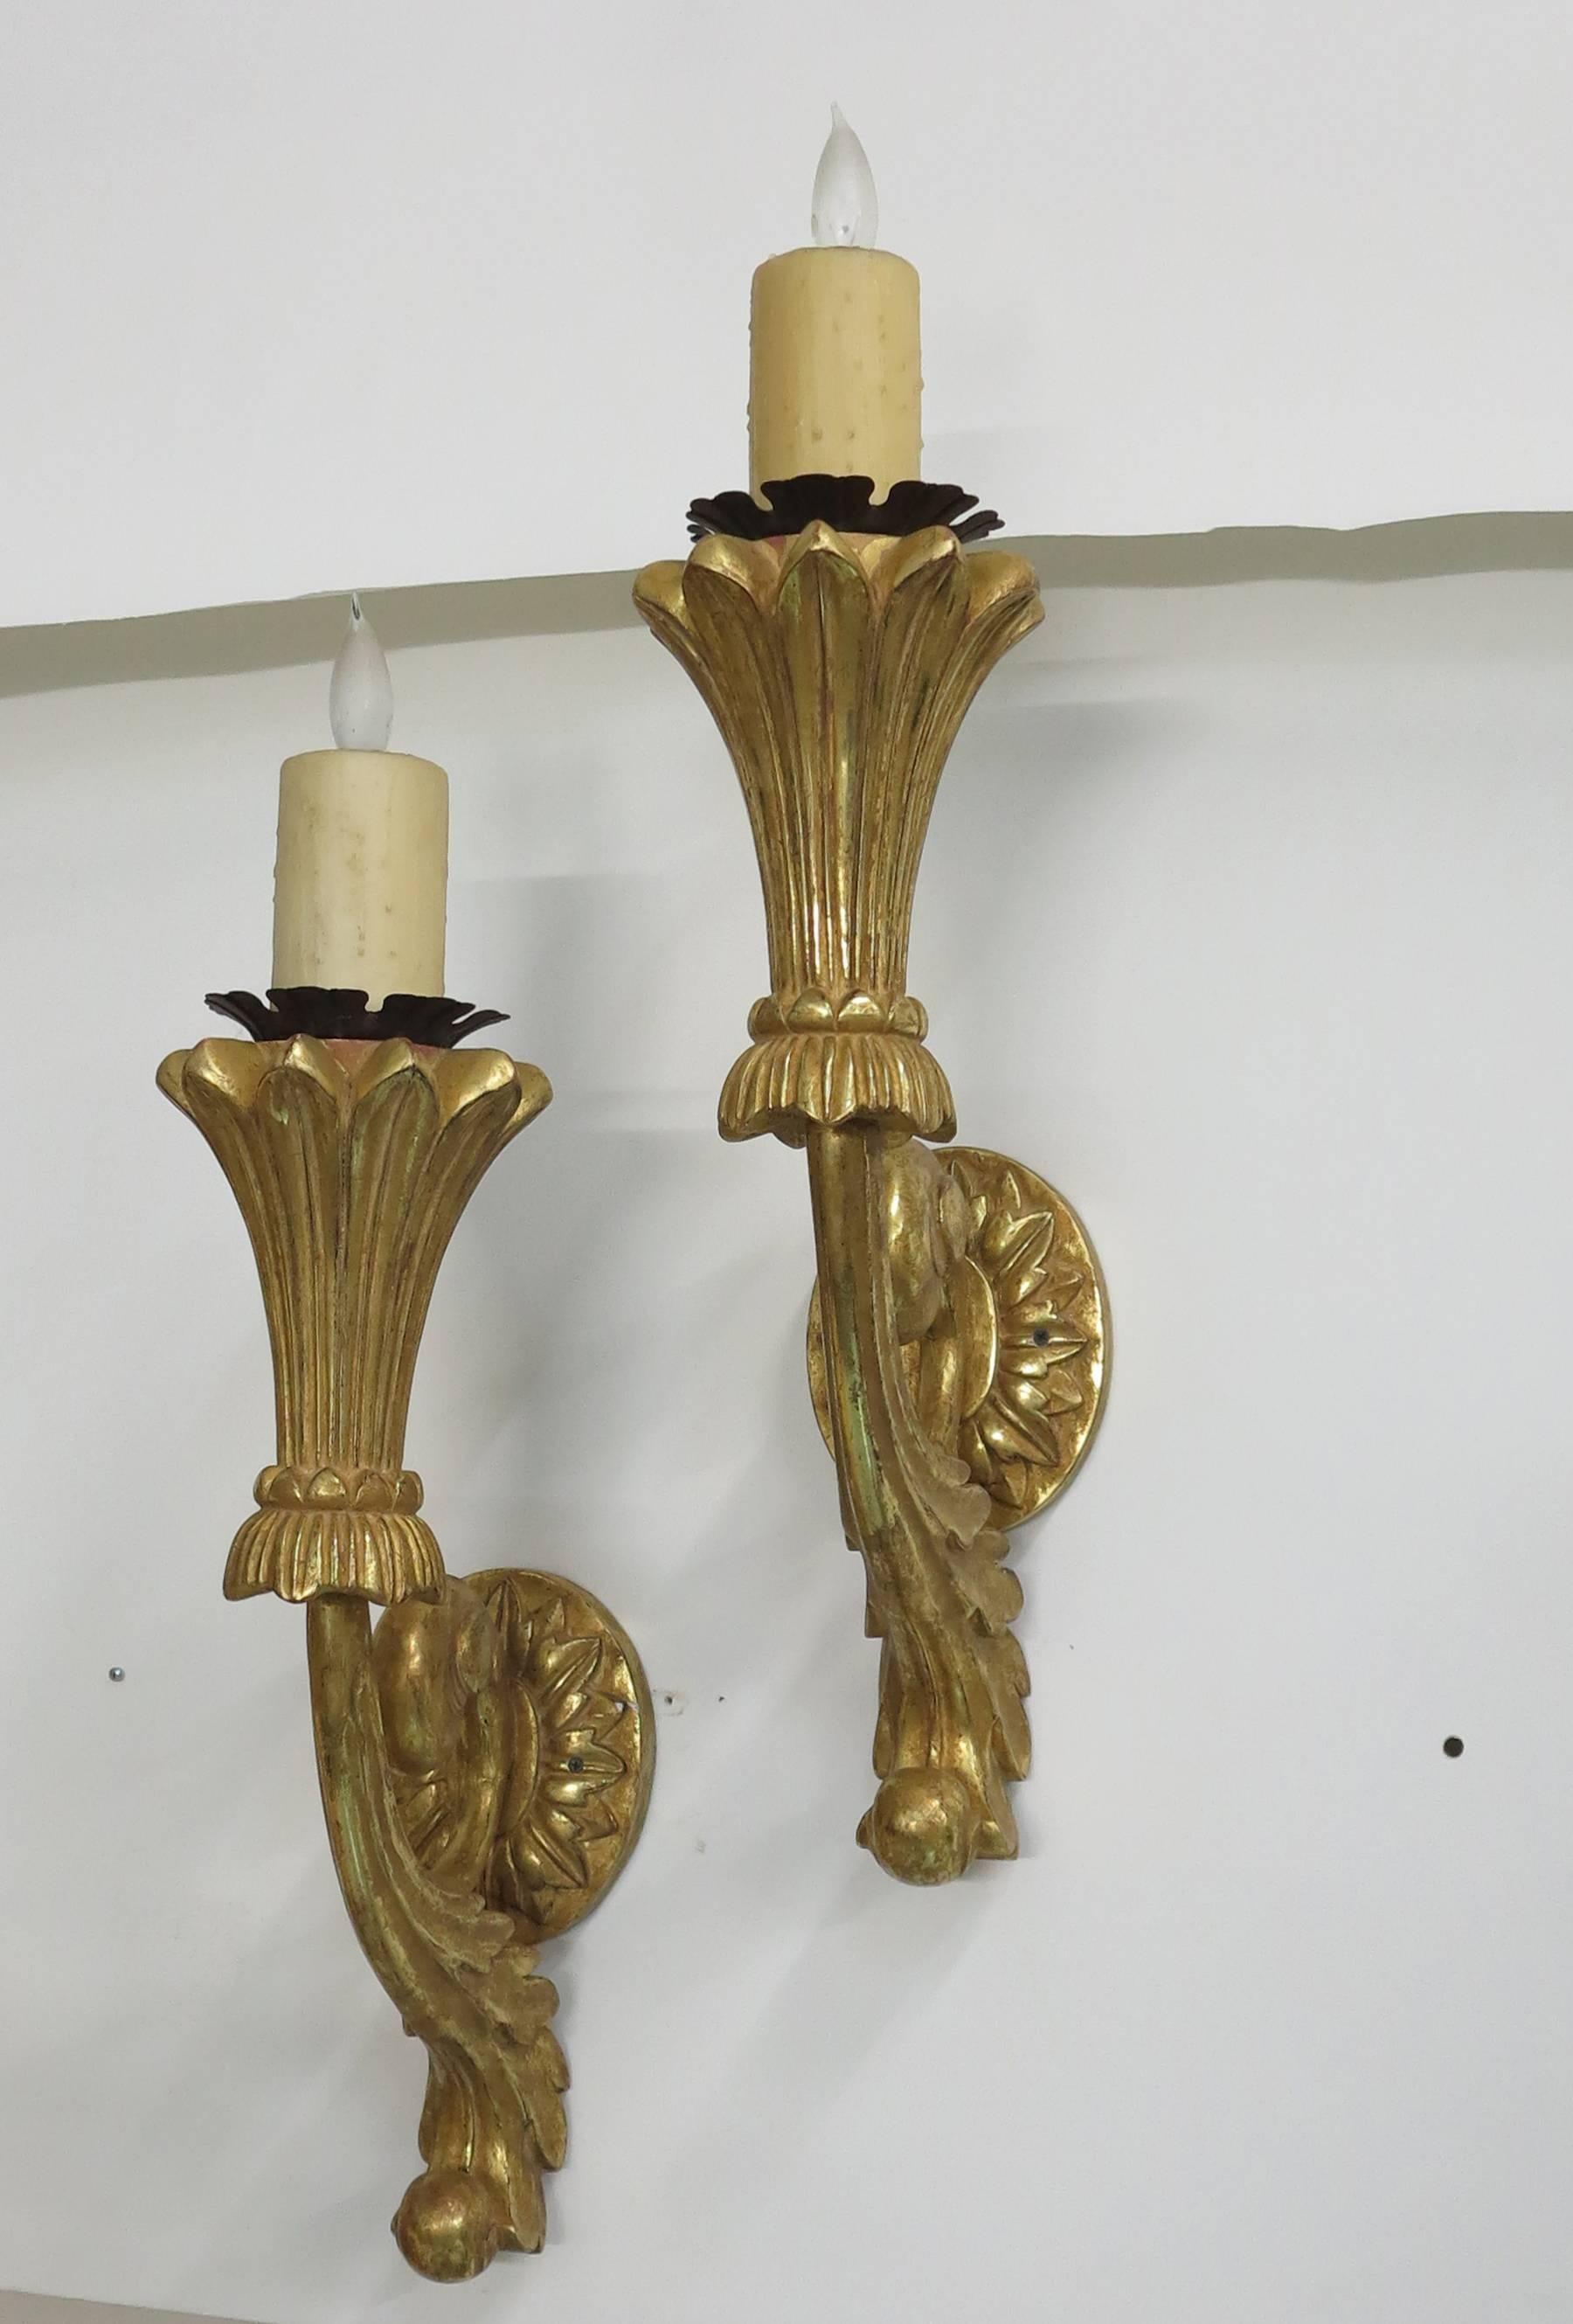 Italian Carved Gilt wood wall sconces. Pair large scale wood sconces with a bright gilt finish